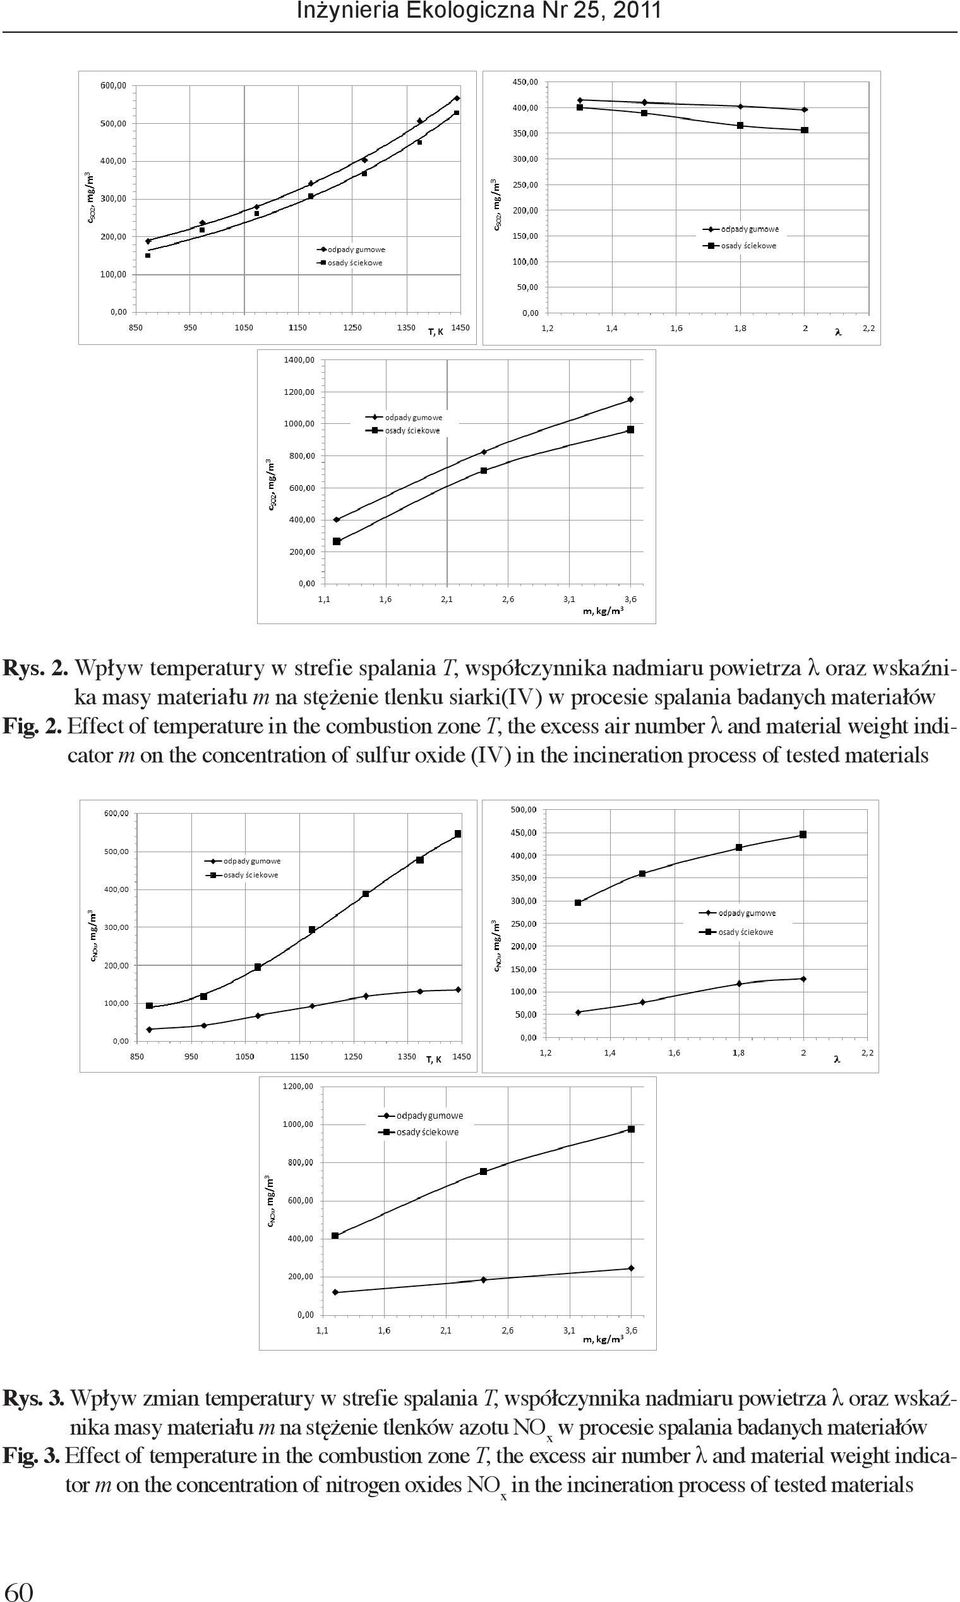 Effect of temperature in the combustion zone T, the excess air number λ and material weight indicator m on the concentration of sulfur oxide (IV) in the incineration process of tested materials